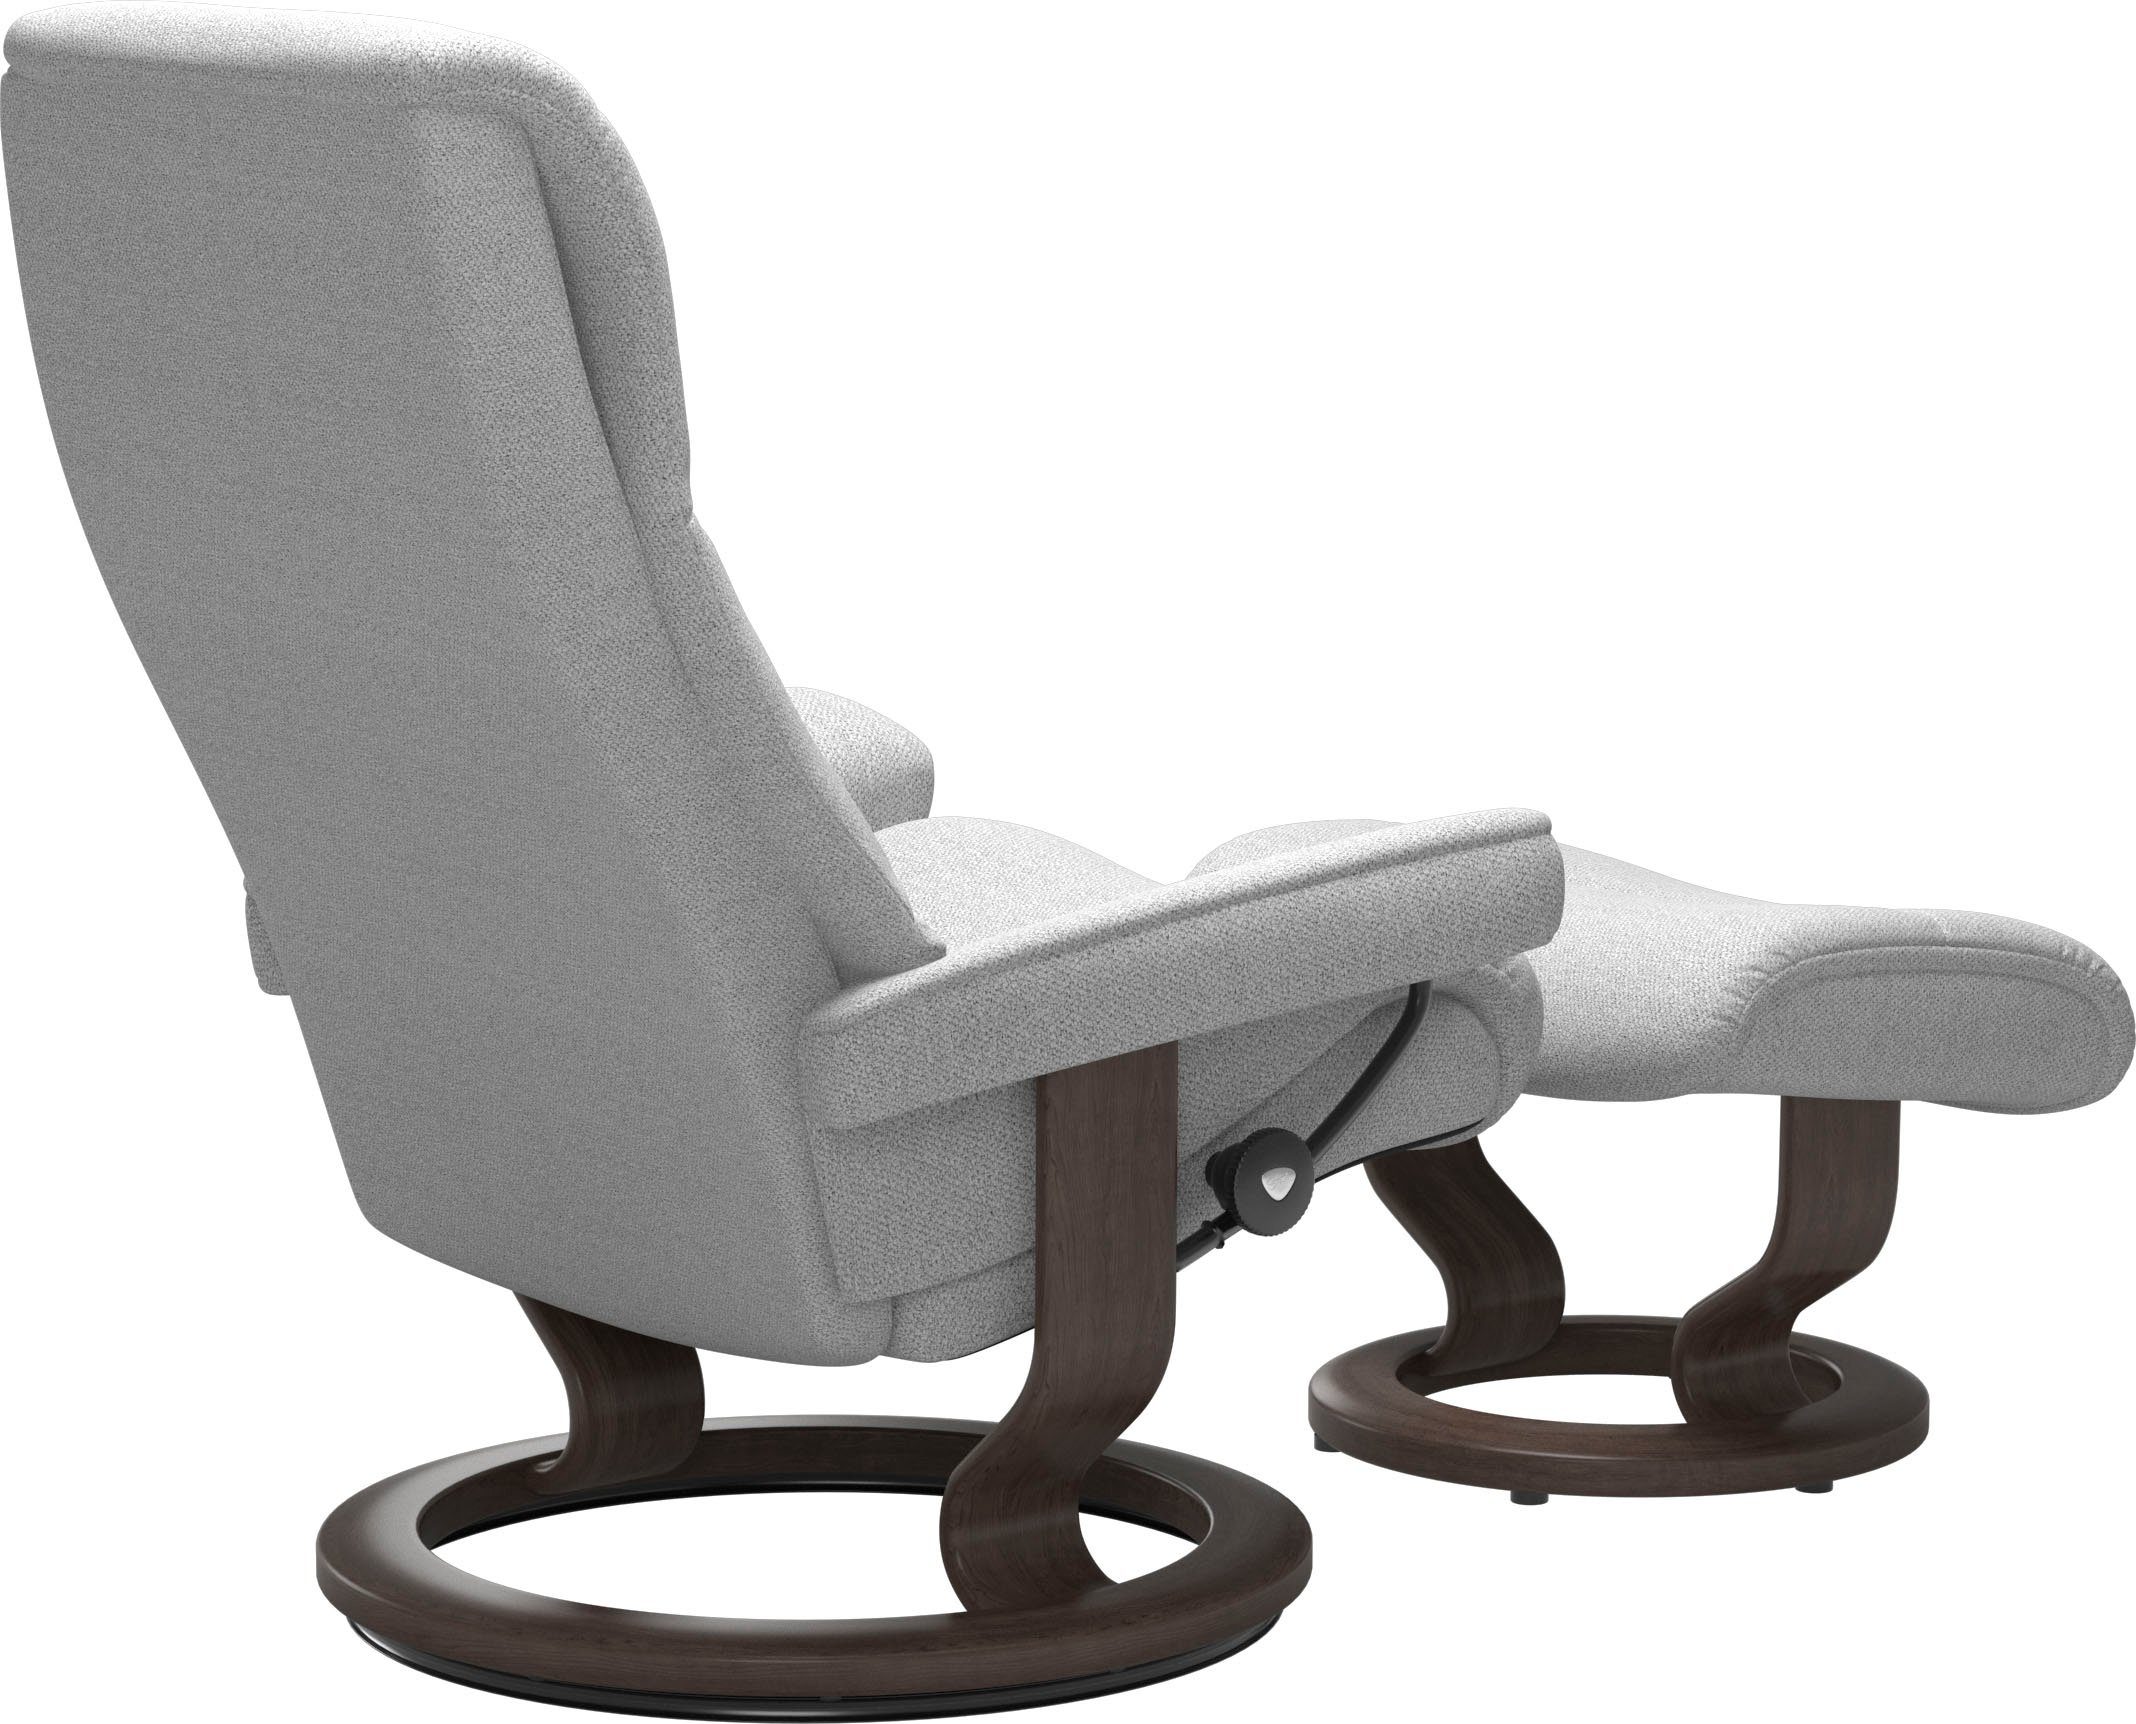 Base, Größe View, Relaxsessel Stressless® Wenge L,Gestell Classic mit